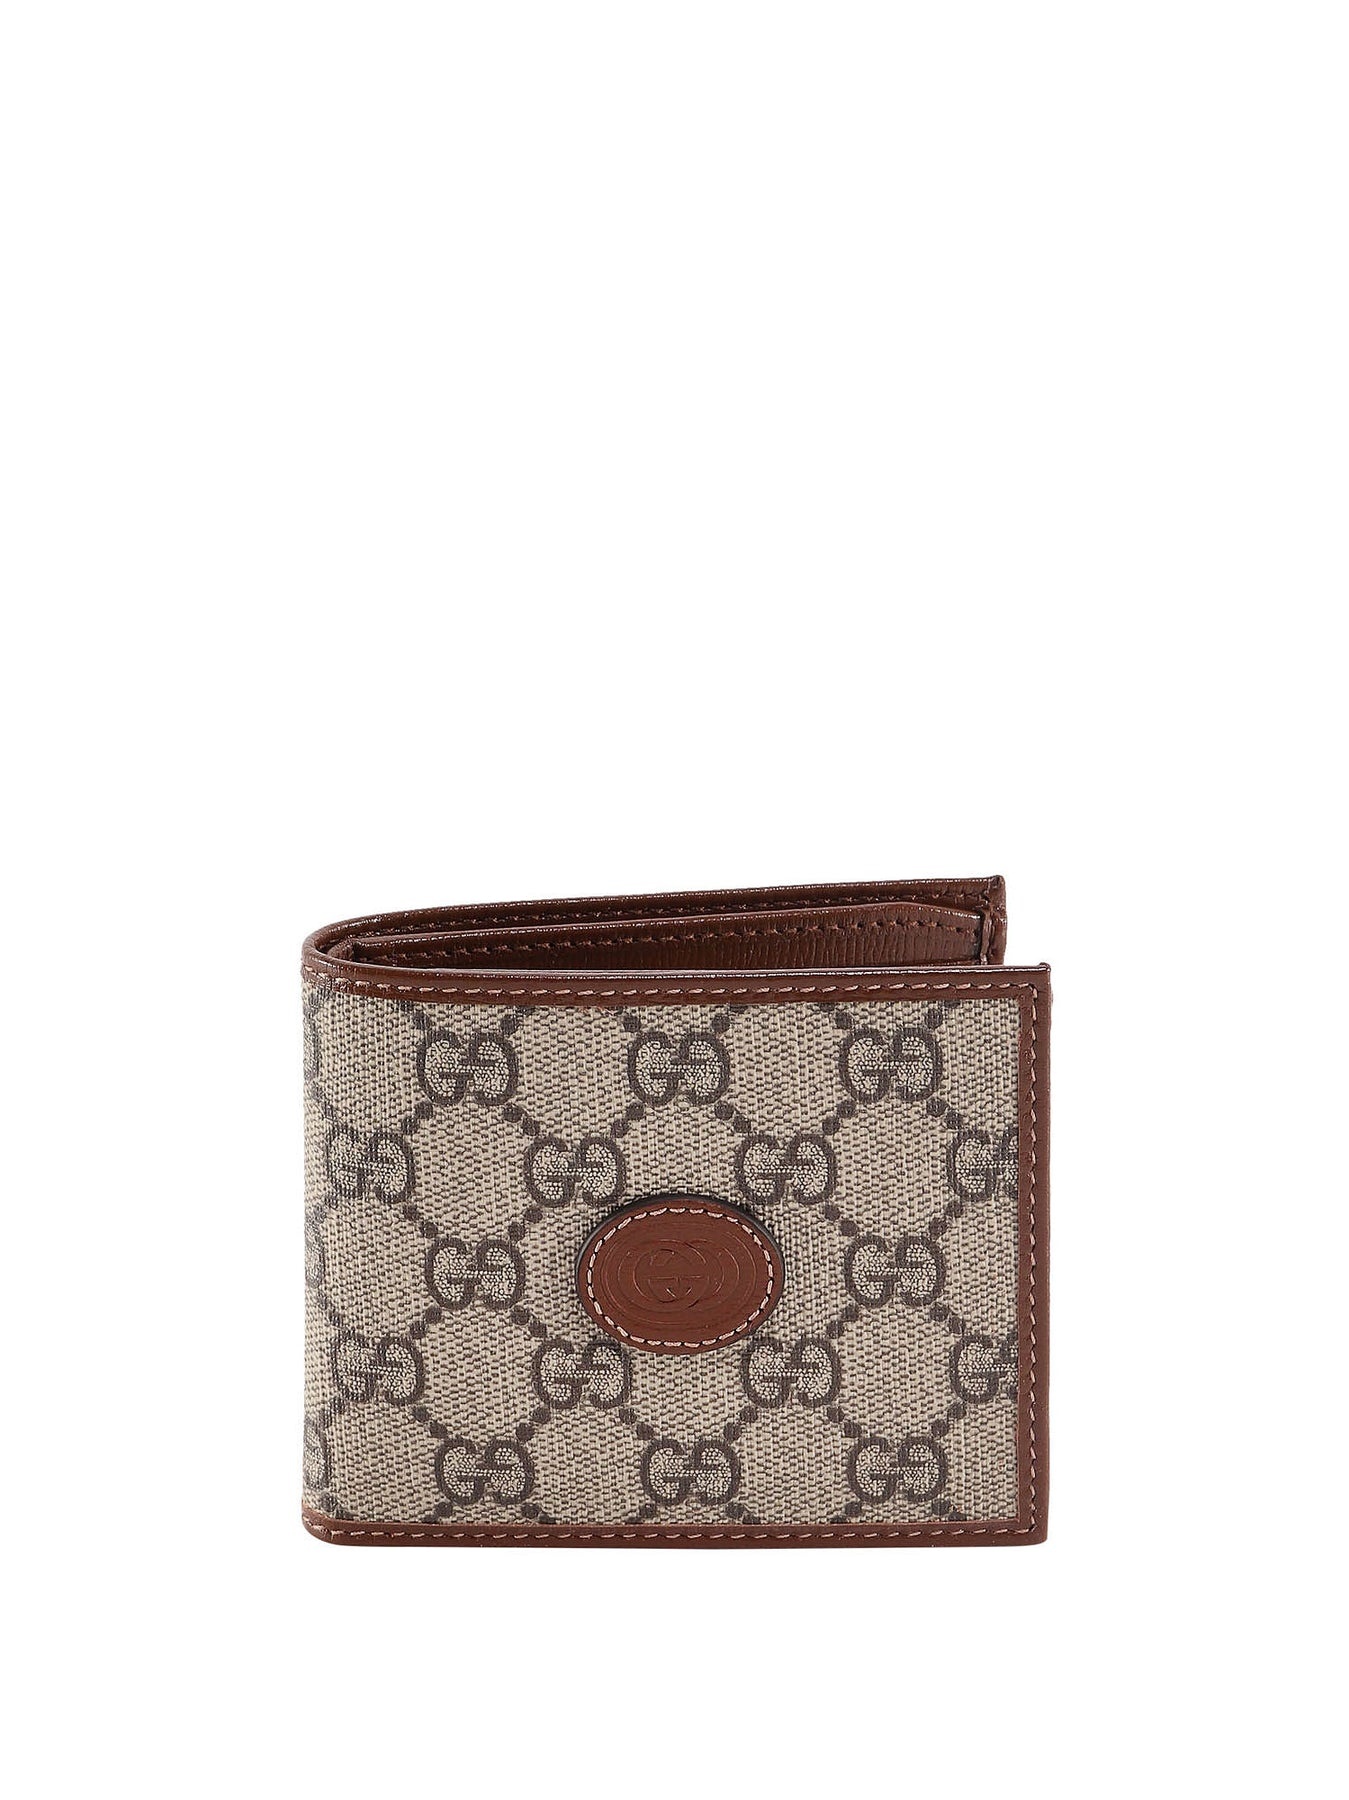 GG wallet with oval leather tag - 1